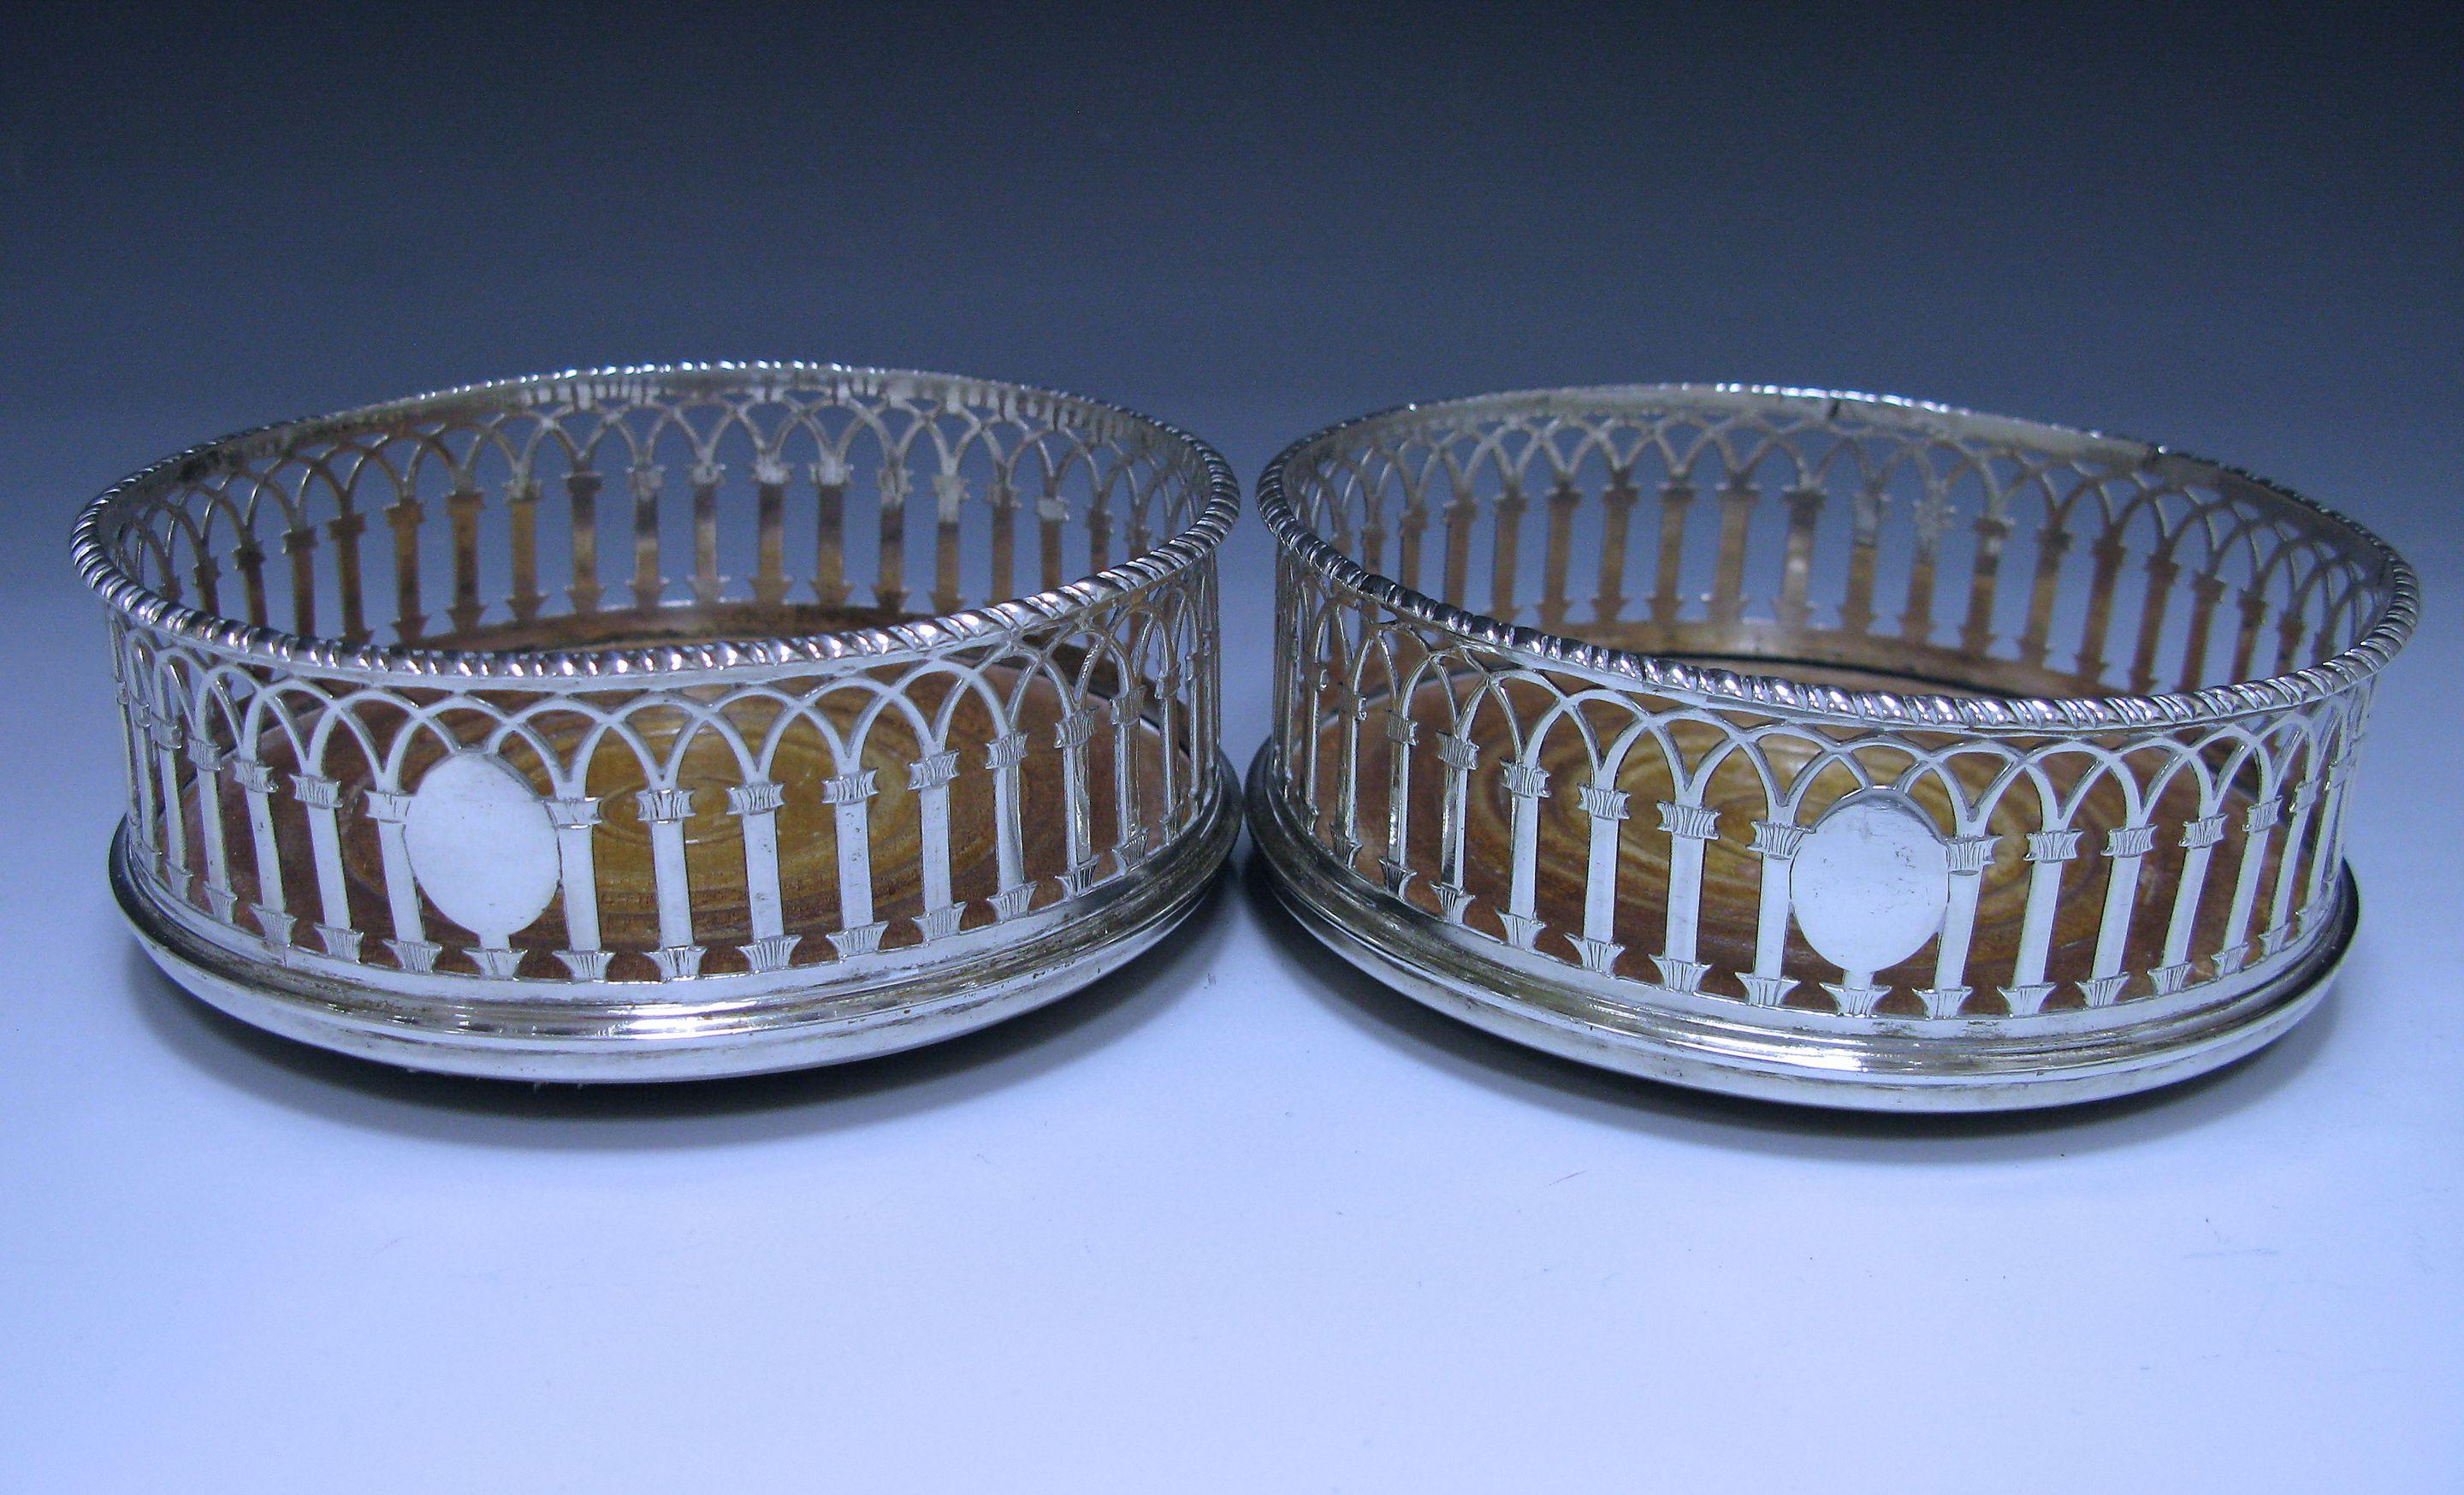 A pair of superb George III antique sterling silver coasters with rope -twist edges, pierced arched shaped borders and turned wooden bases. The pierced borders also contain an oval vacant cartouche. The coasters have green baize to the underside.